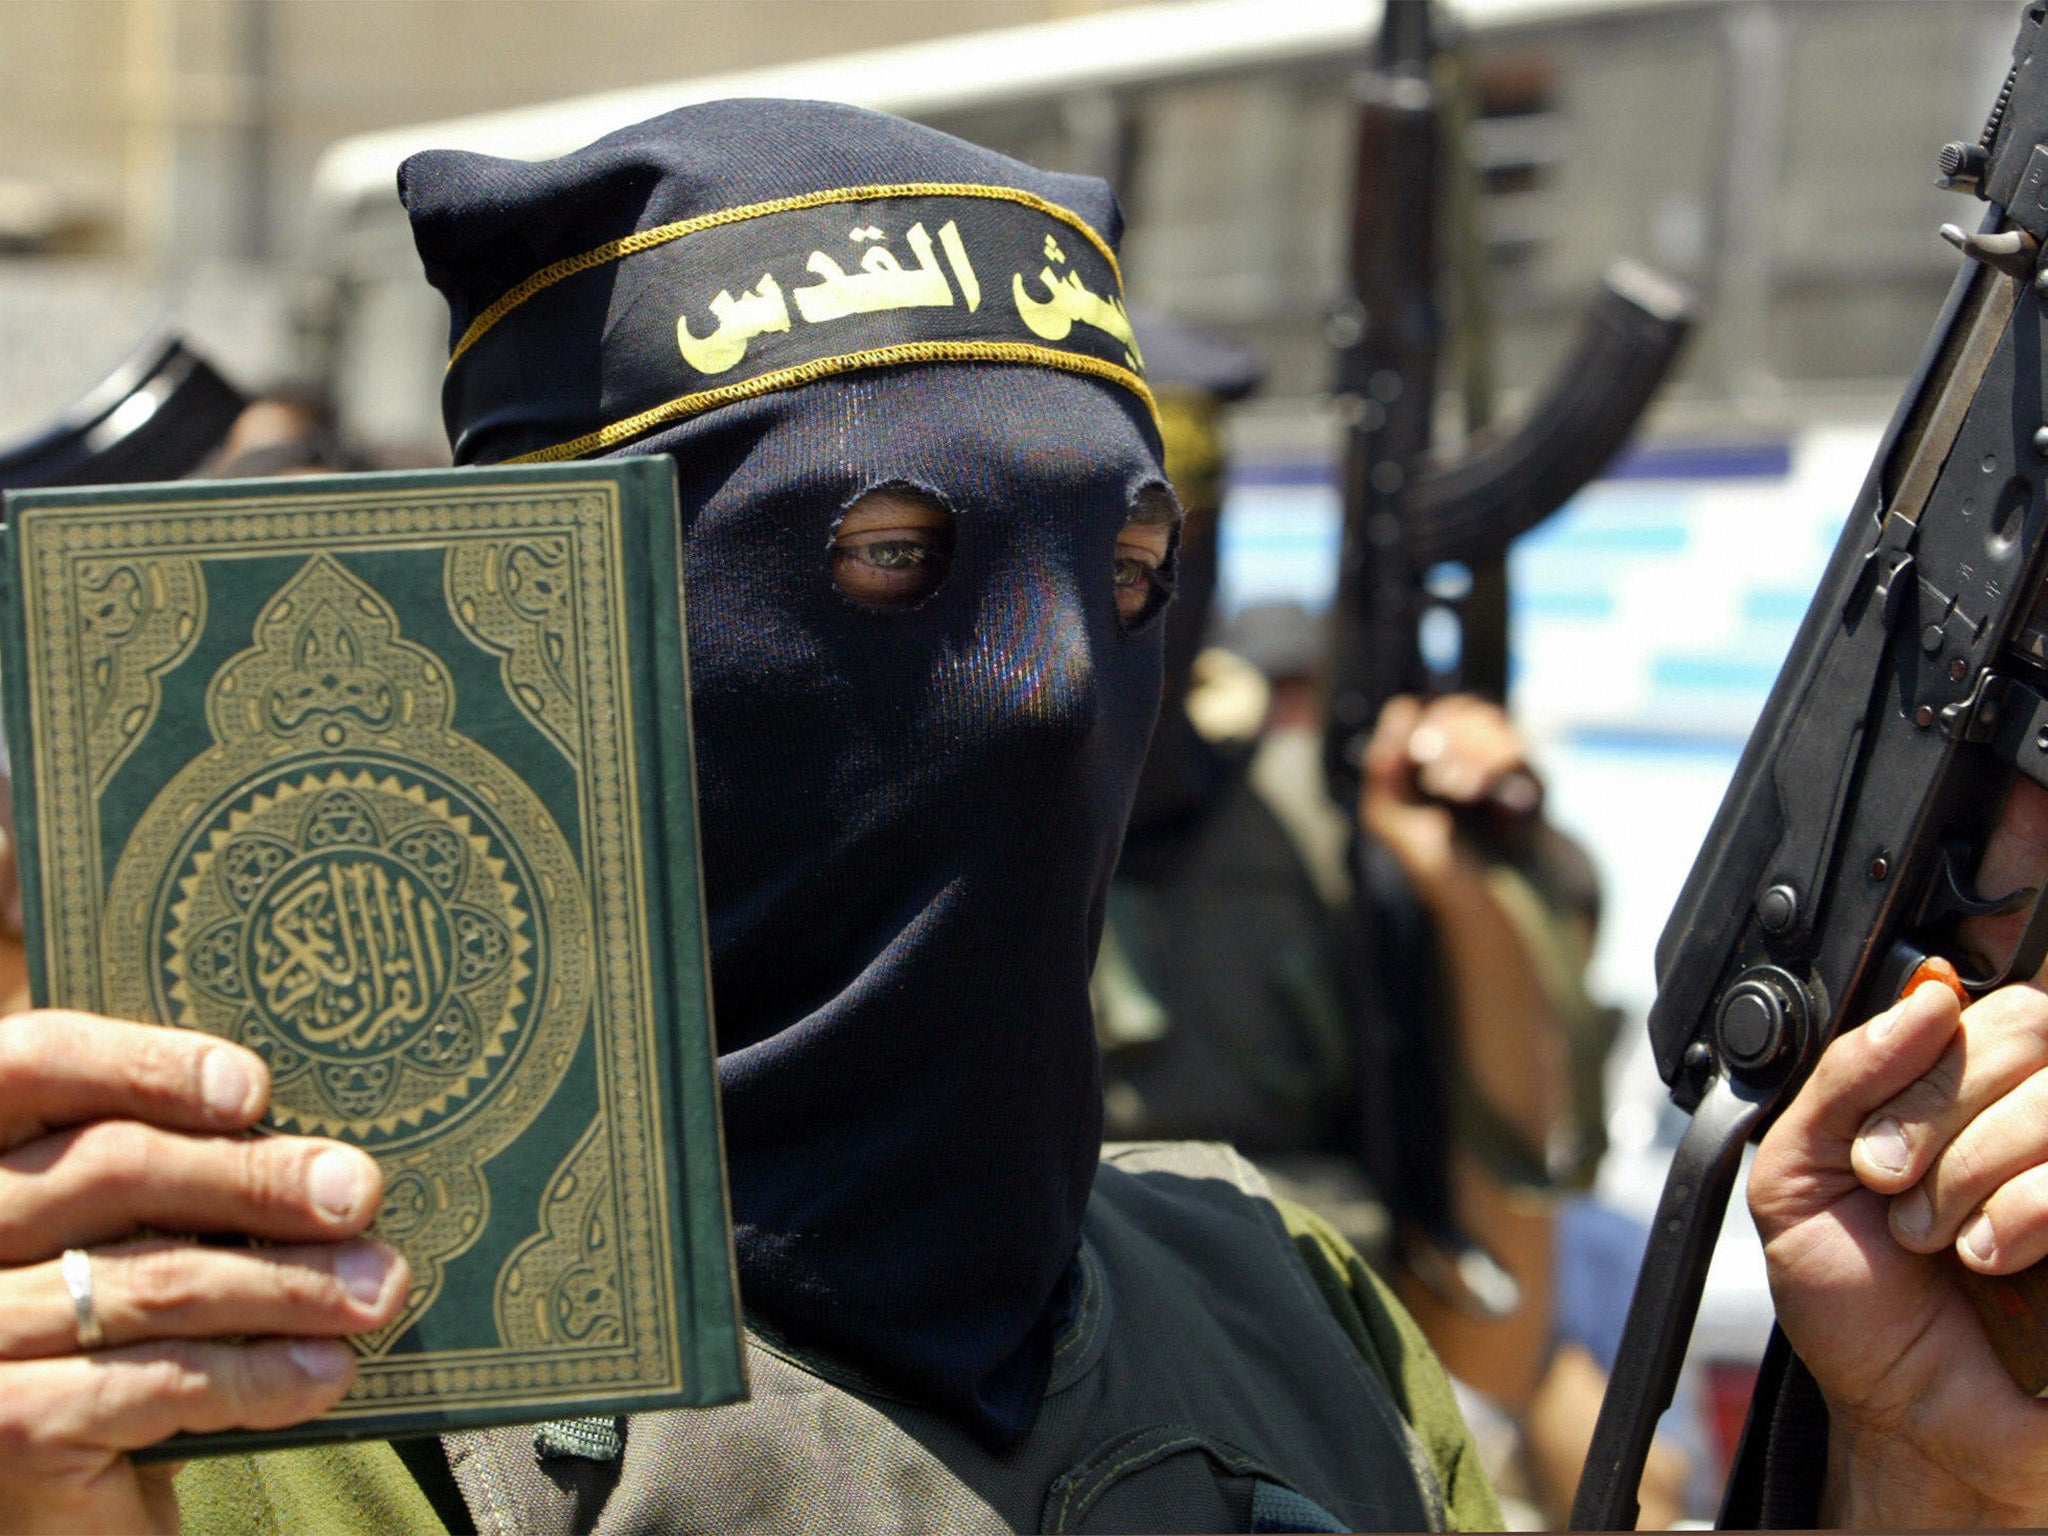 An Islamic Jihad militant holds up a copy of the Koran in one hand and an automatic rifle in the other during a rally in Beit Lahia in the northern Gaza Strip (Getty)